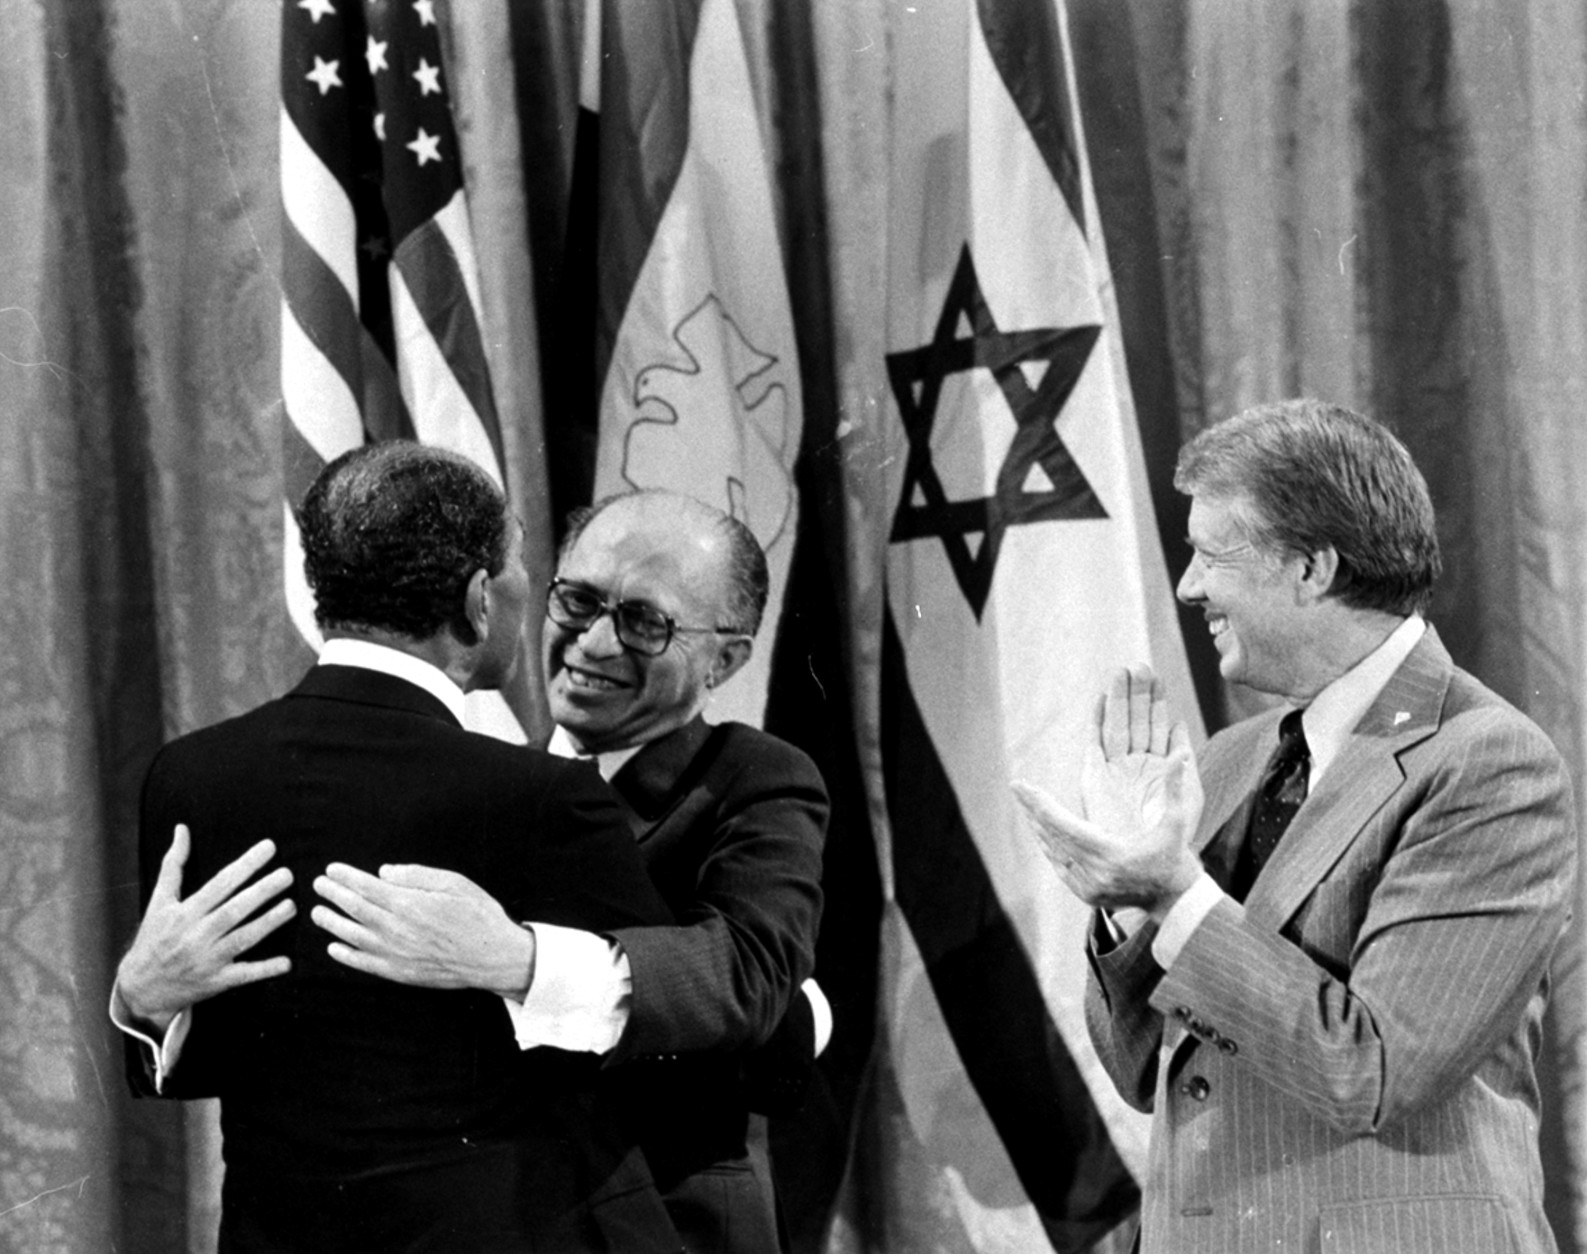 Egyptian President Anwar Sadat, left, and Israeli Prime Minister Menachem Begin, embrace as U.S. President Jimmy Carter looks on, September 18, 1978, during a White House announcement of a Middle East peace agreement reached at the Camp David Summit earlier this year.  Sadat and Begin were named joint winners in the 1978 Nobel Peace Prize in an announcement Friday, October 27, from officials in Oslo, Norway.  (AP Photo)